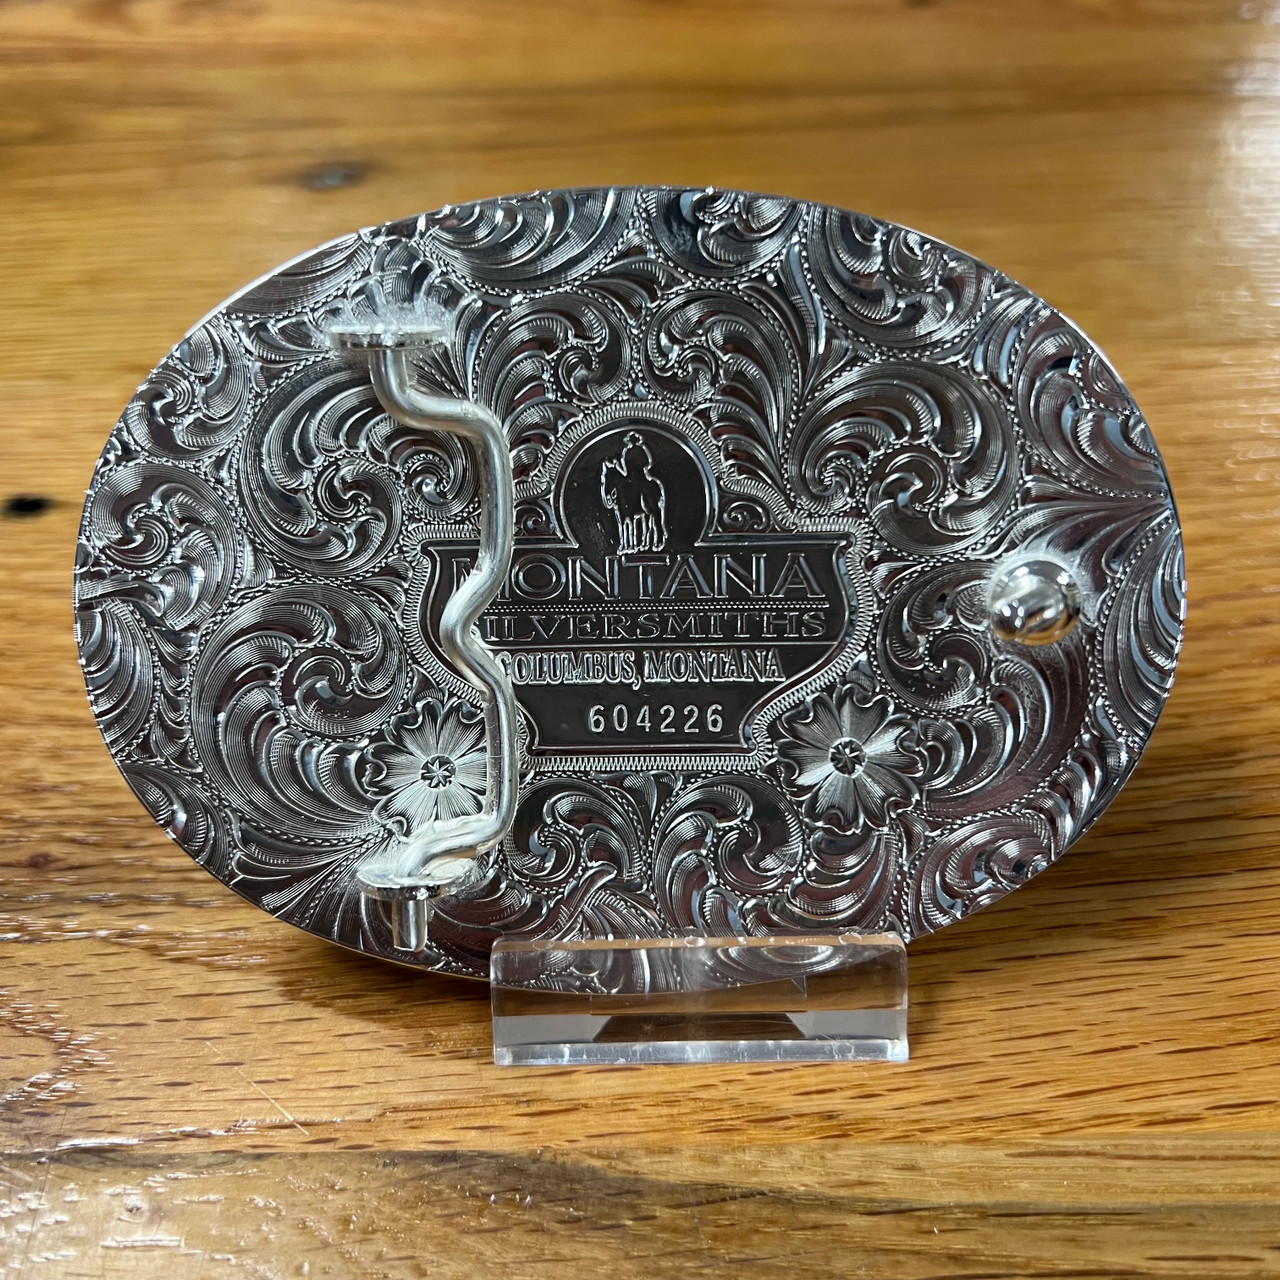 Montana Silversmith Belt Buckles: A Symbol of the American West插图3